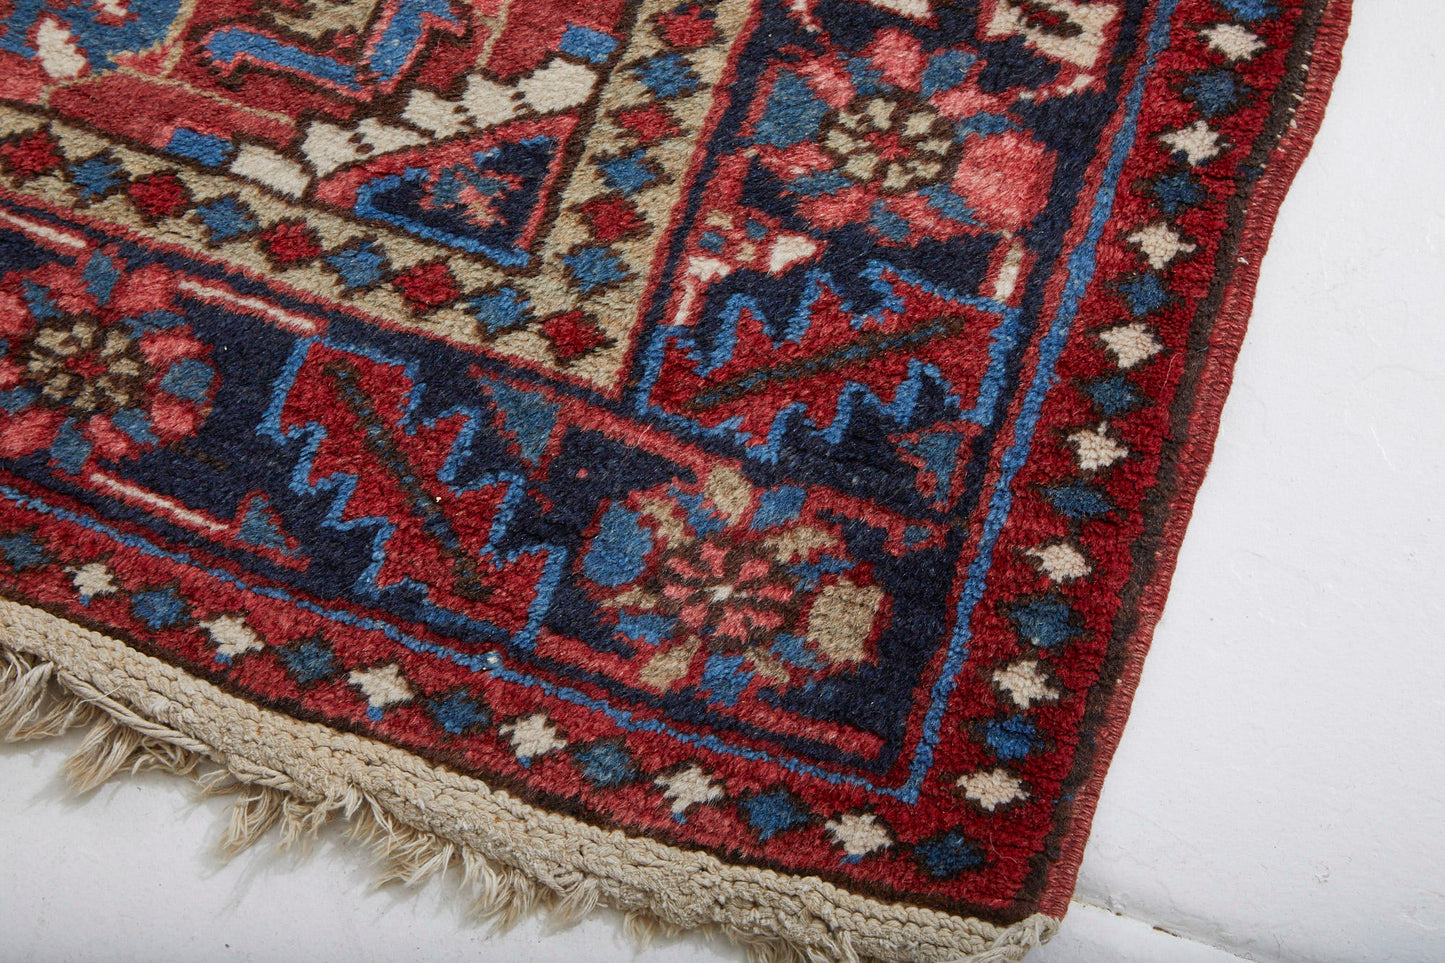 Detail of border - Red, Pink, Blue and White hand woven Heriz sampler Persian Rug - Available from King Kennedy Rugs Los Angeles